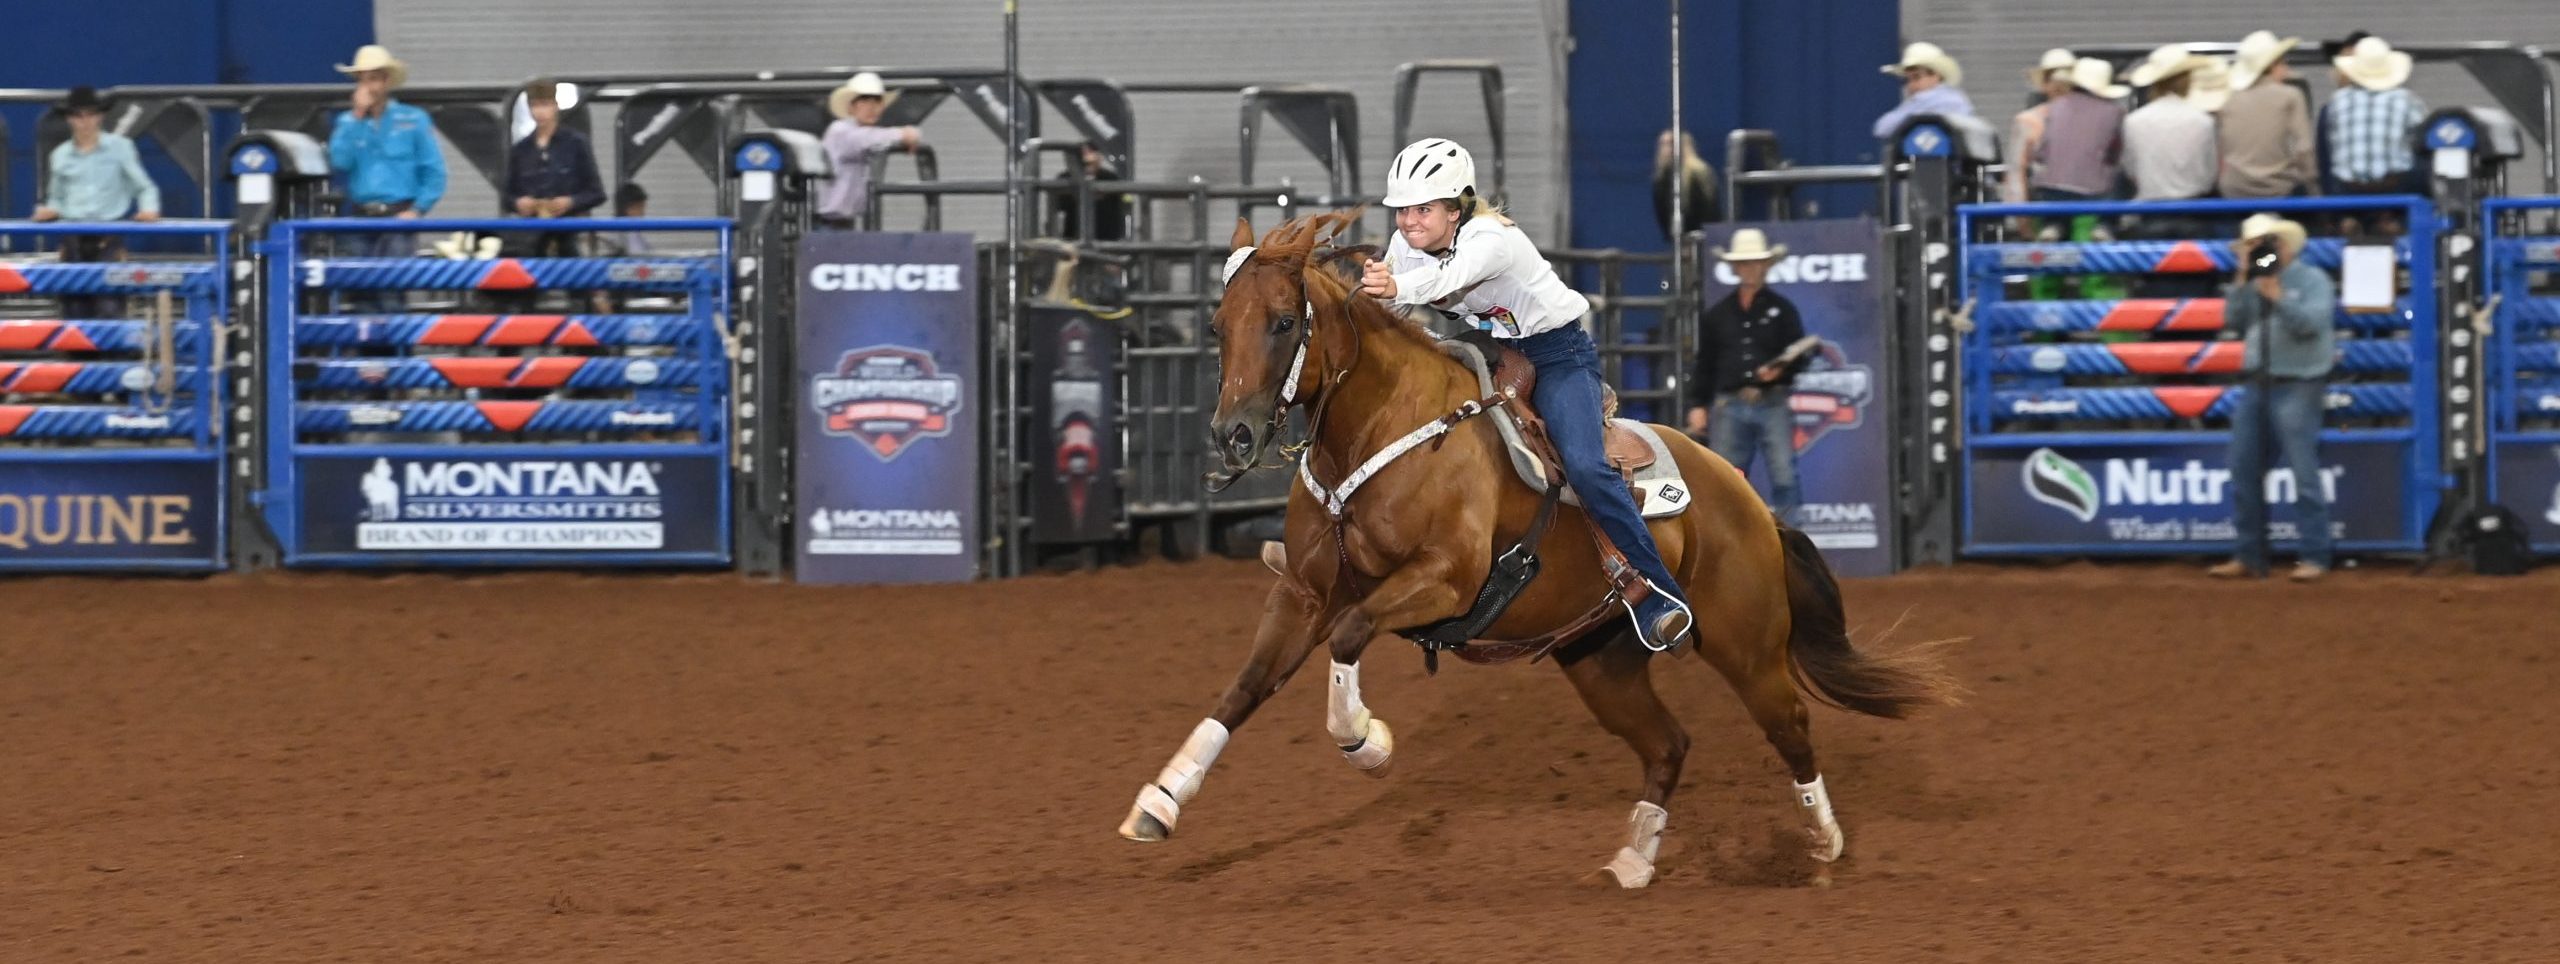 High-Stakes Barrel Race on Tap for Wrangler BFI Week